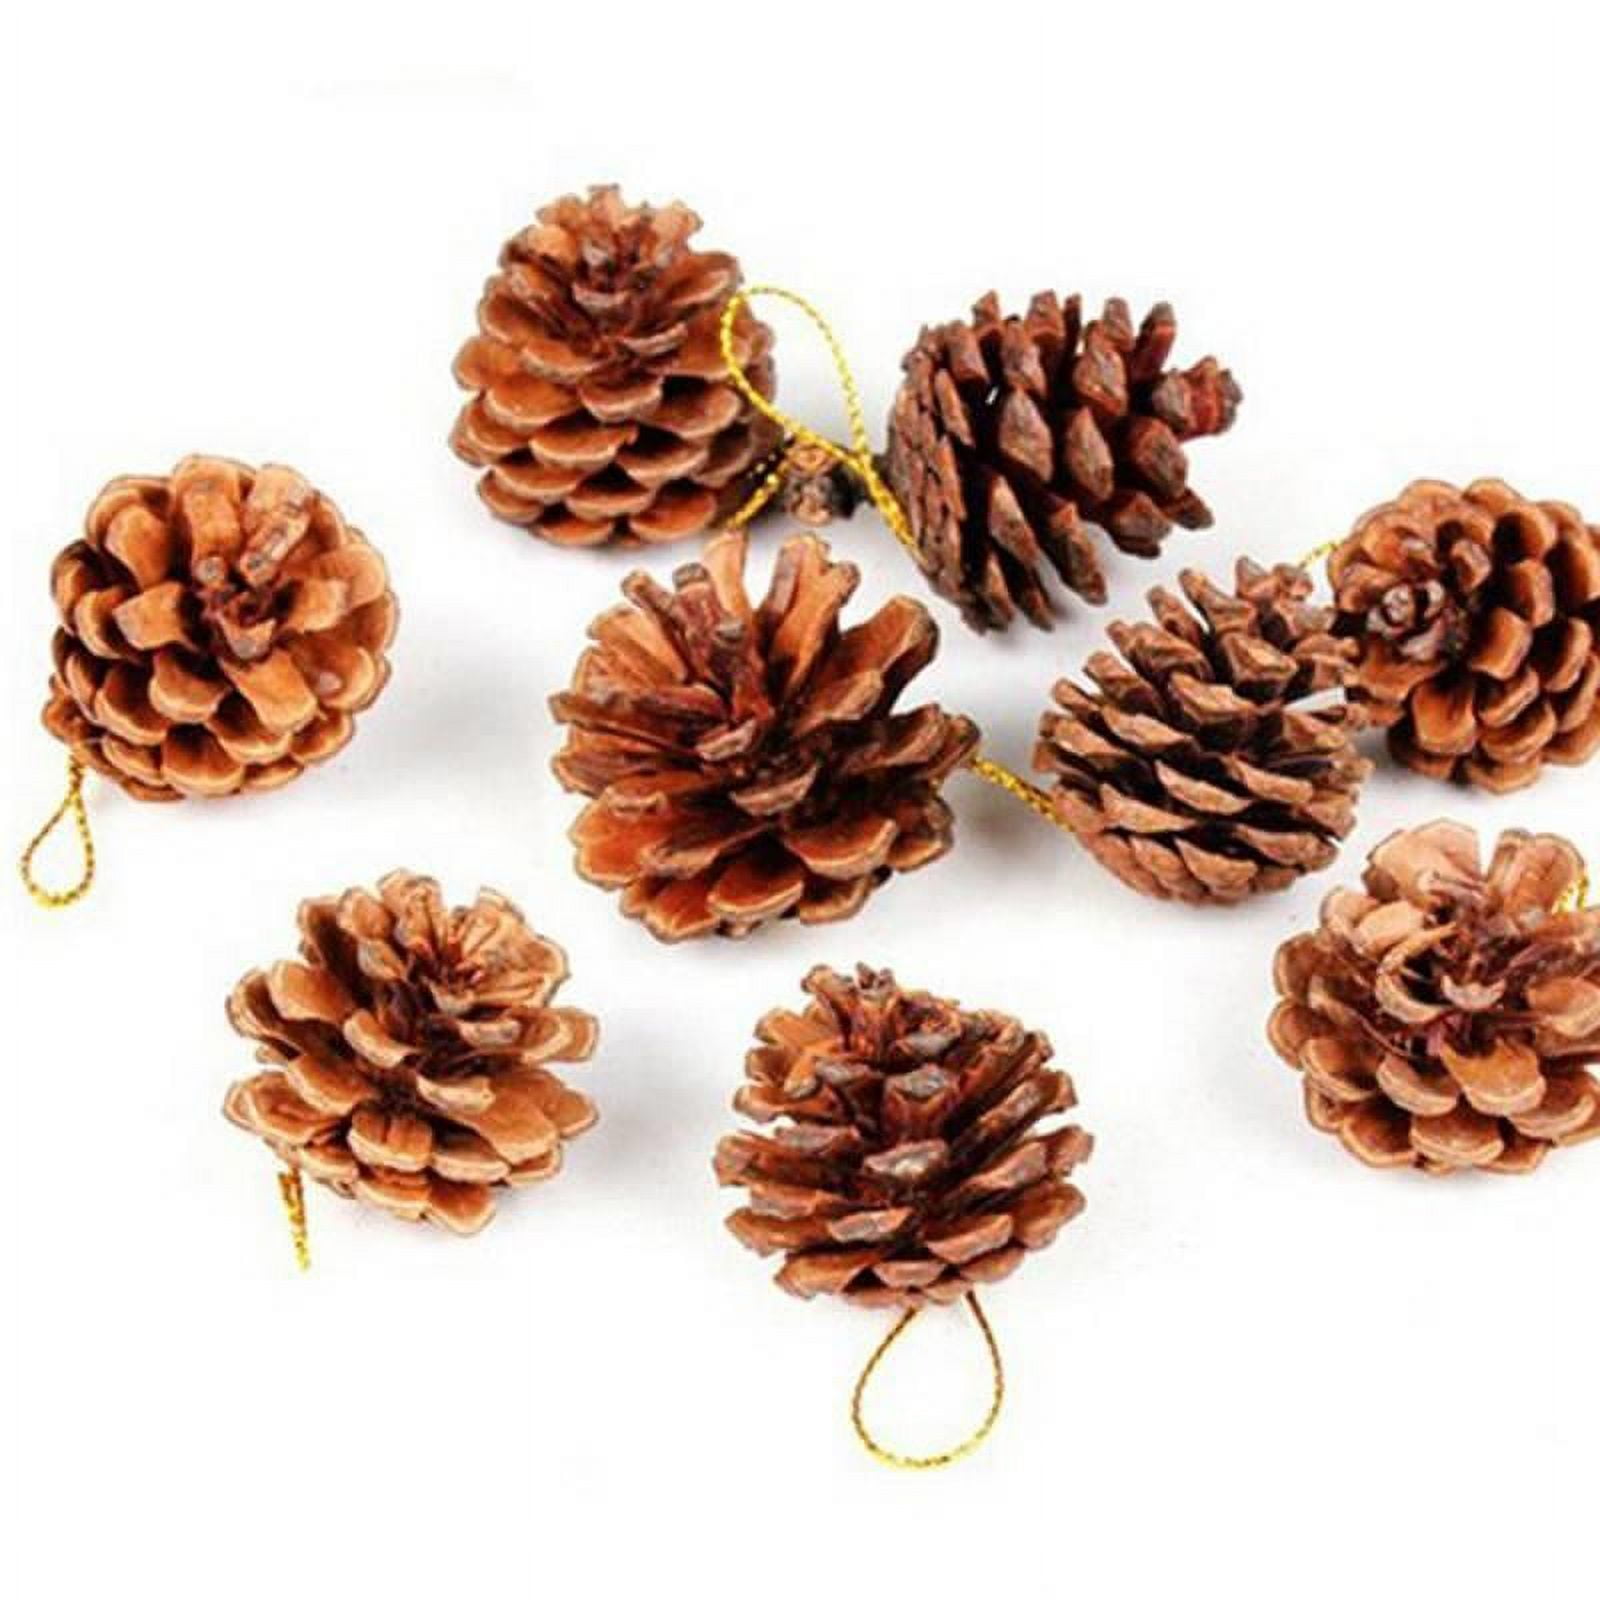 BigOtters 40PCS Pine Cones Decorations, Pine Cones Bulk Natural Pine Cones  Pine Cone Ornaments for Crafts Thanksgiving Christmas Wreath Table Bowl